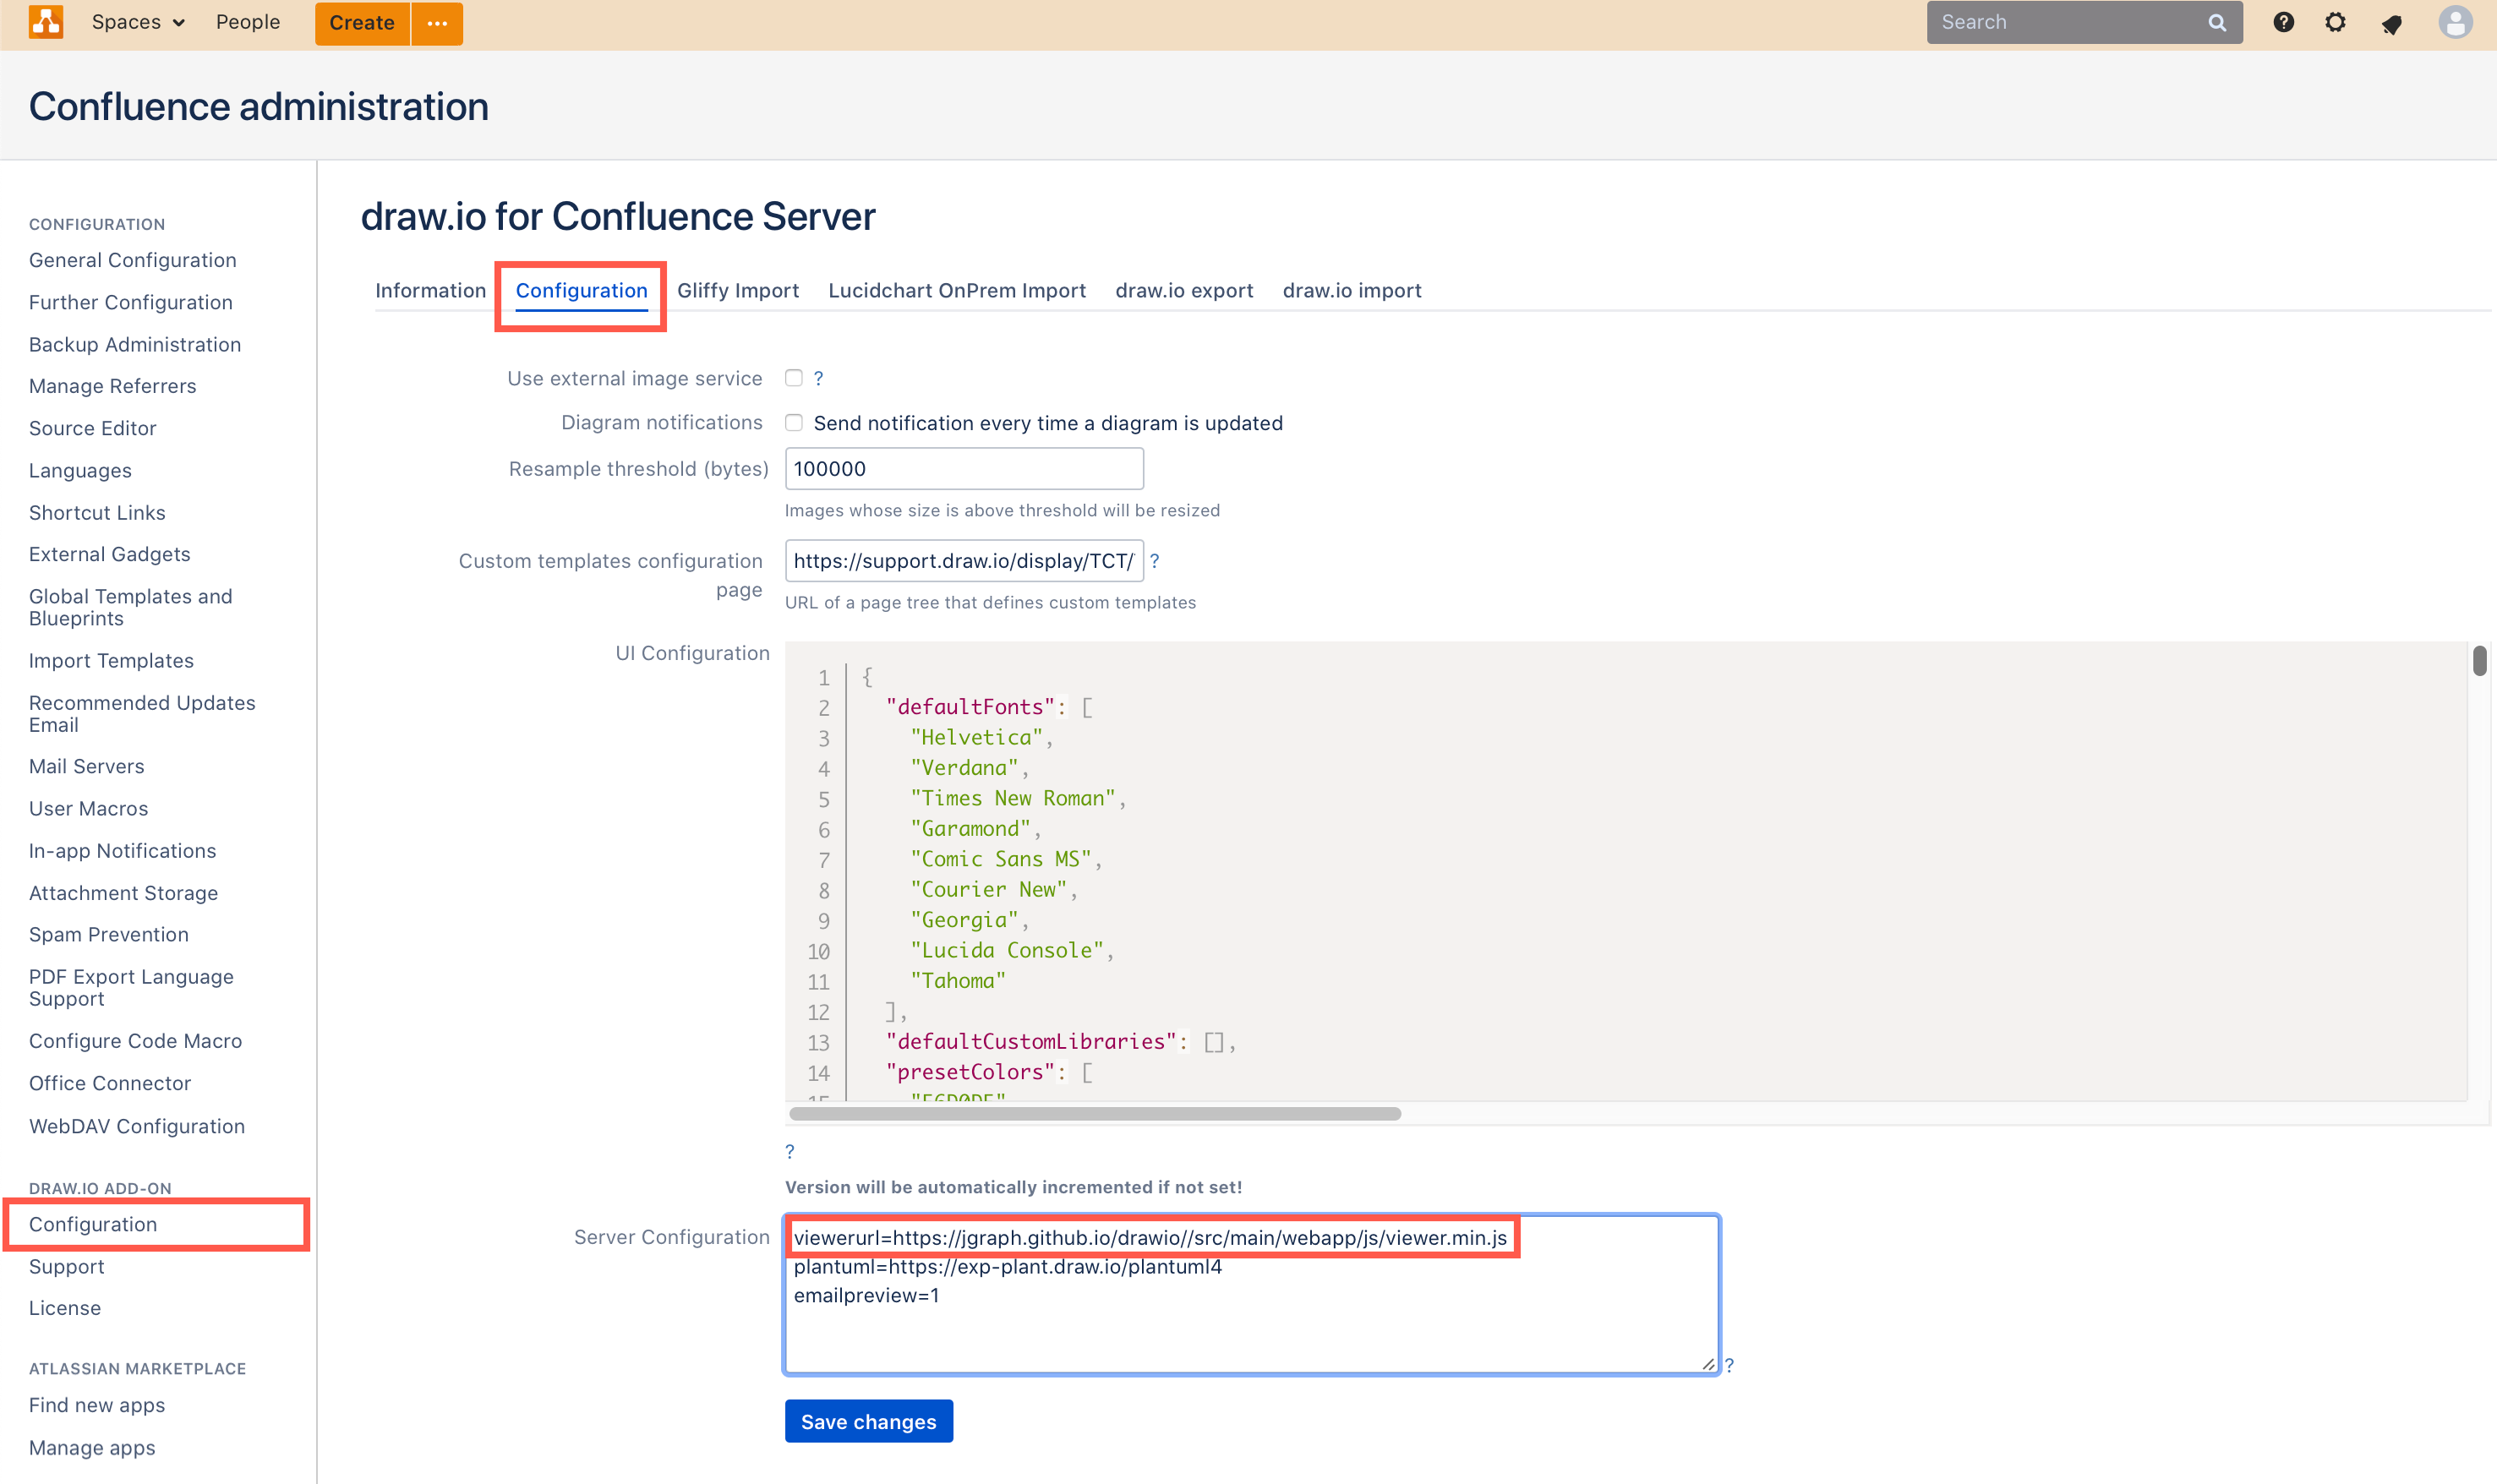 Add the URL to your self-hosted JavaScript viewer script to the draw.io Server Configuration field